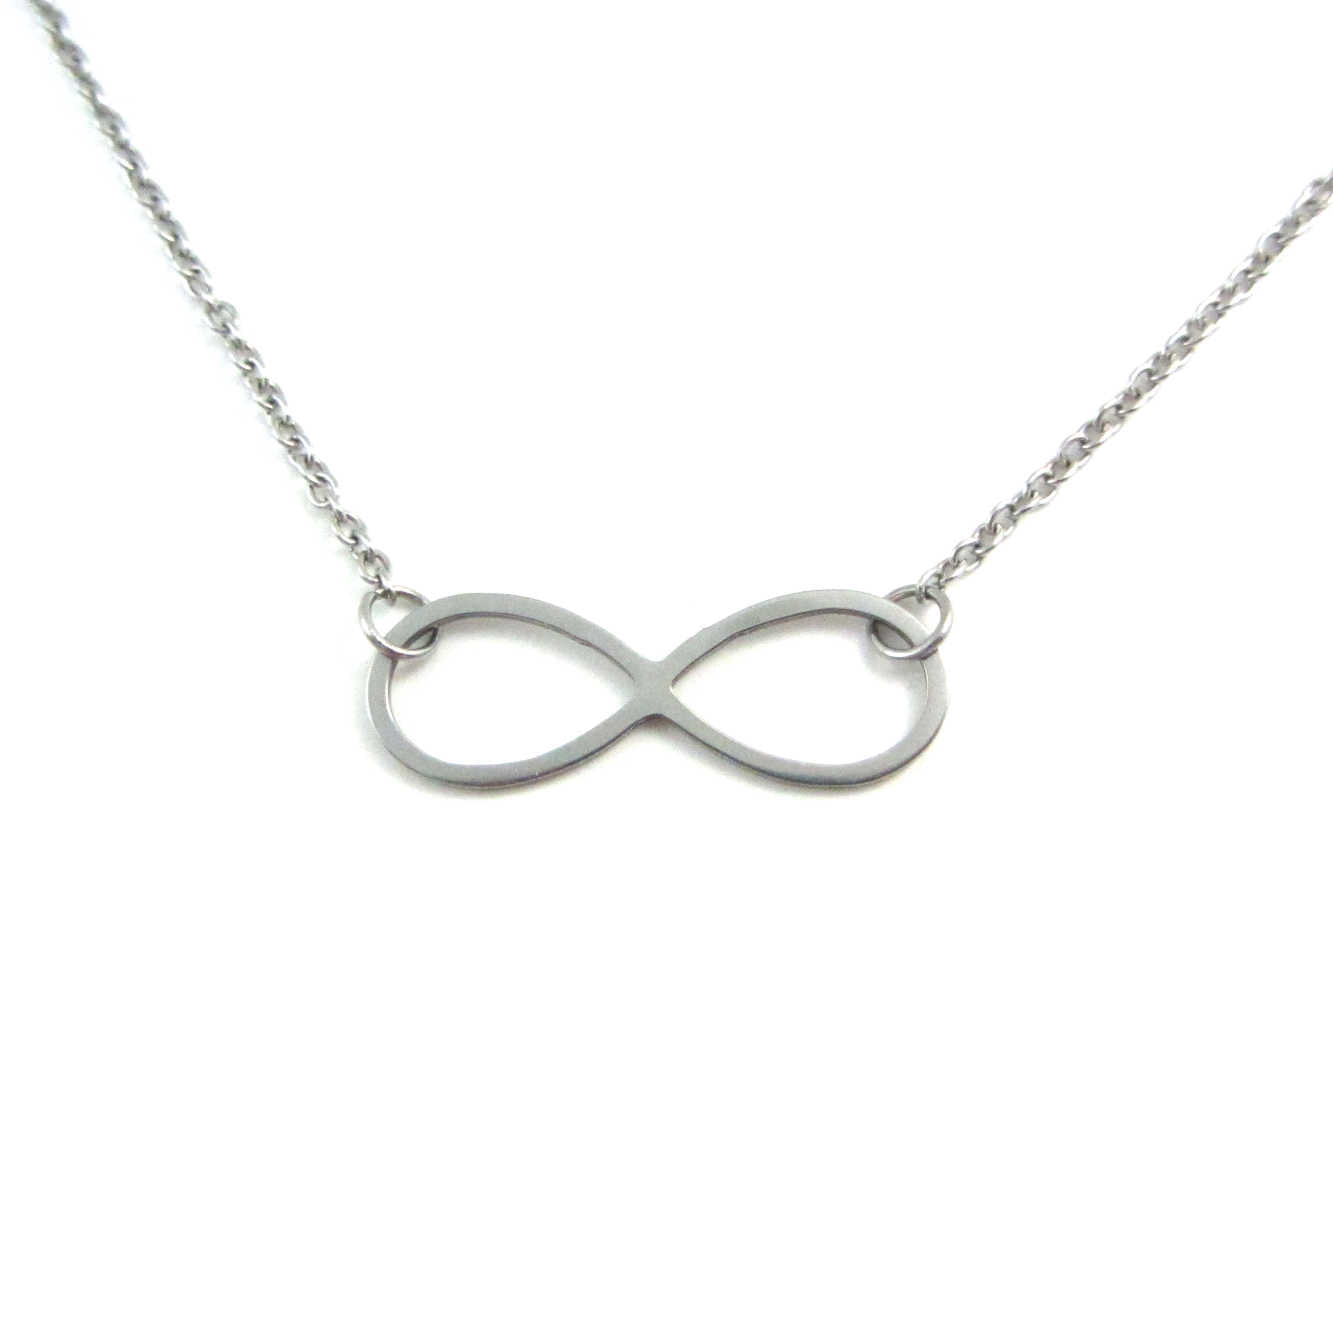 infinity charm on a stainless steel chain